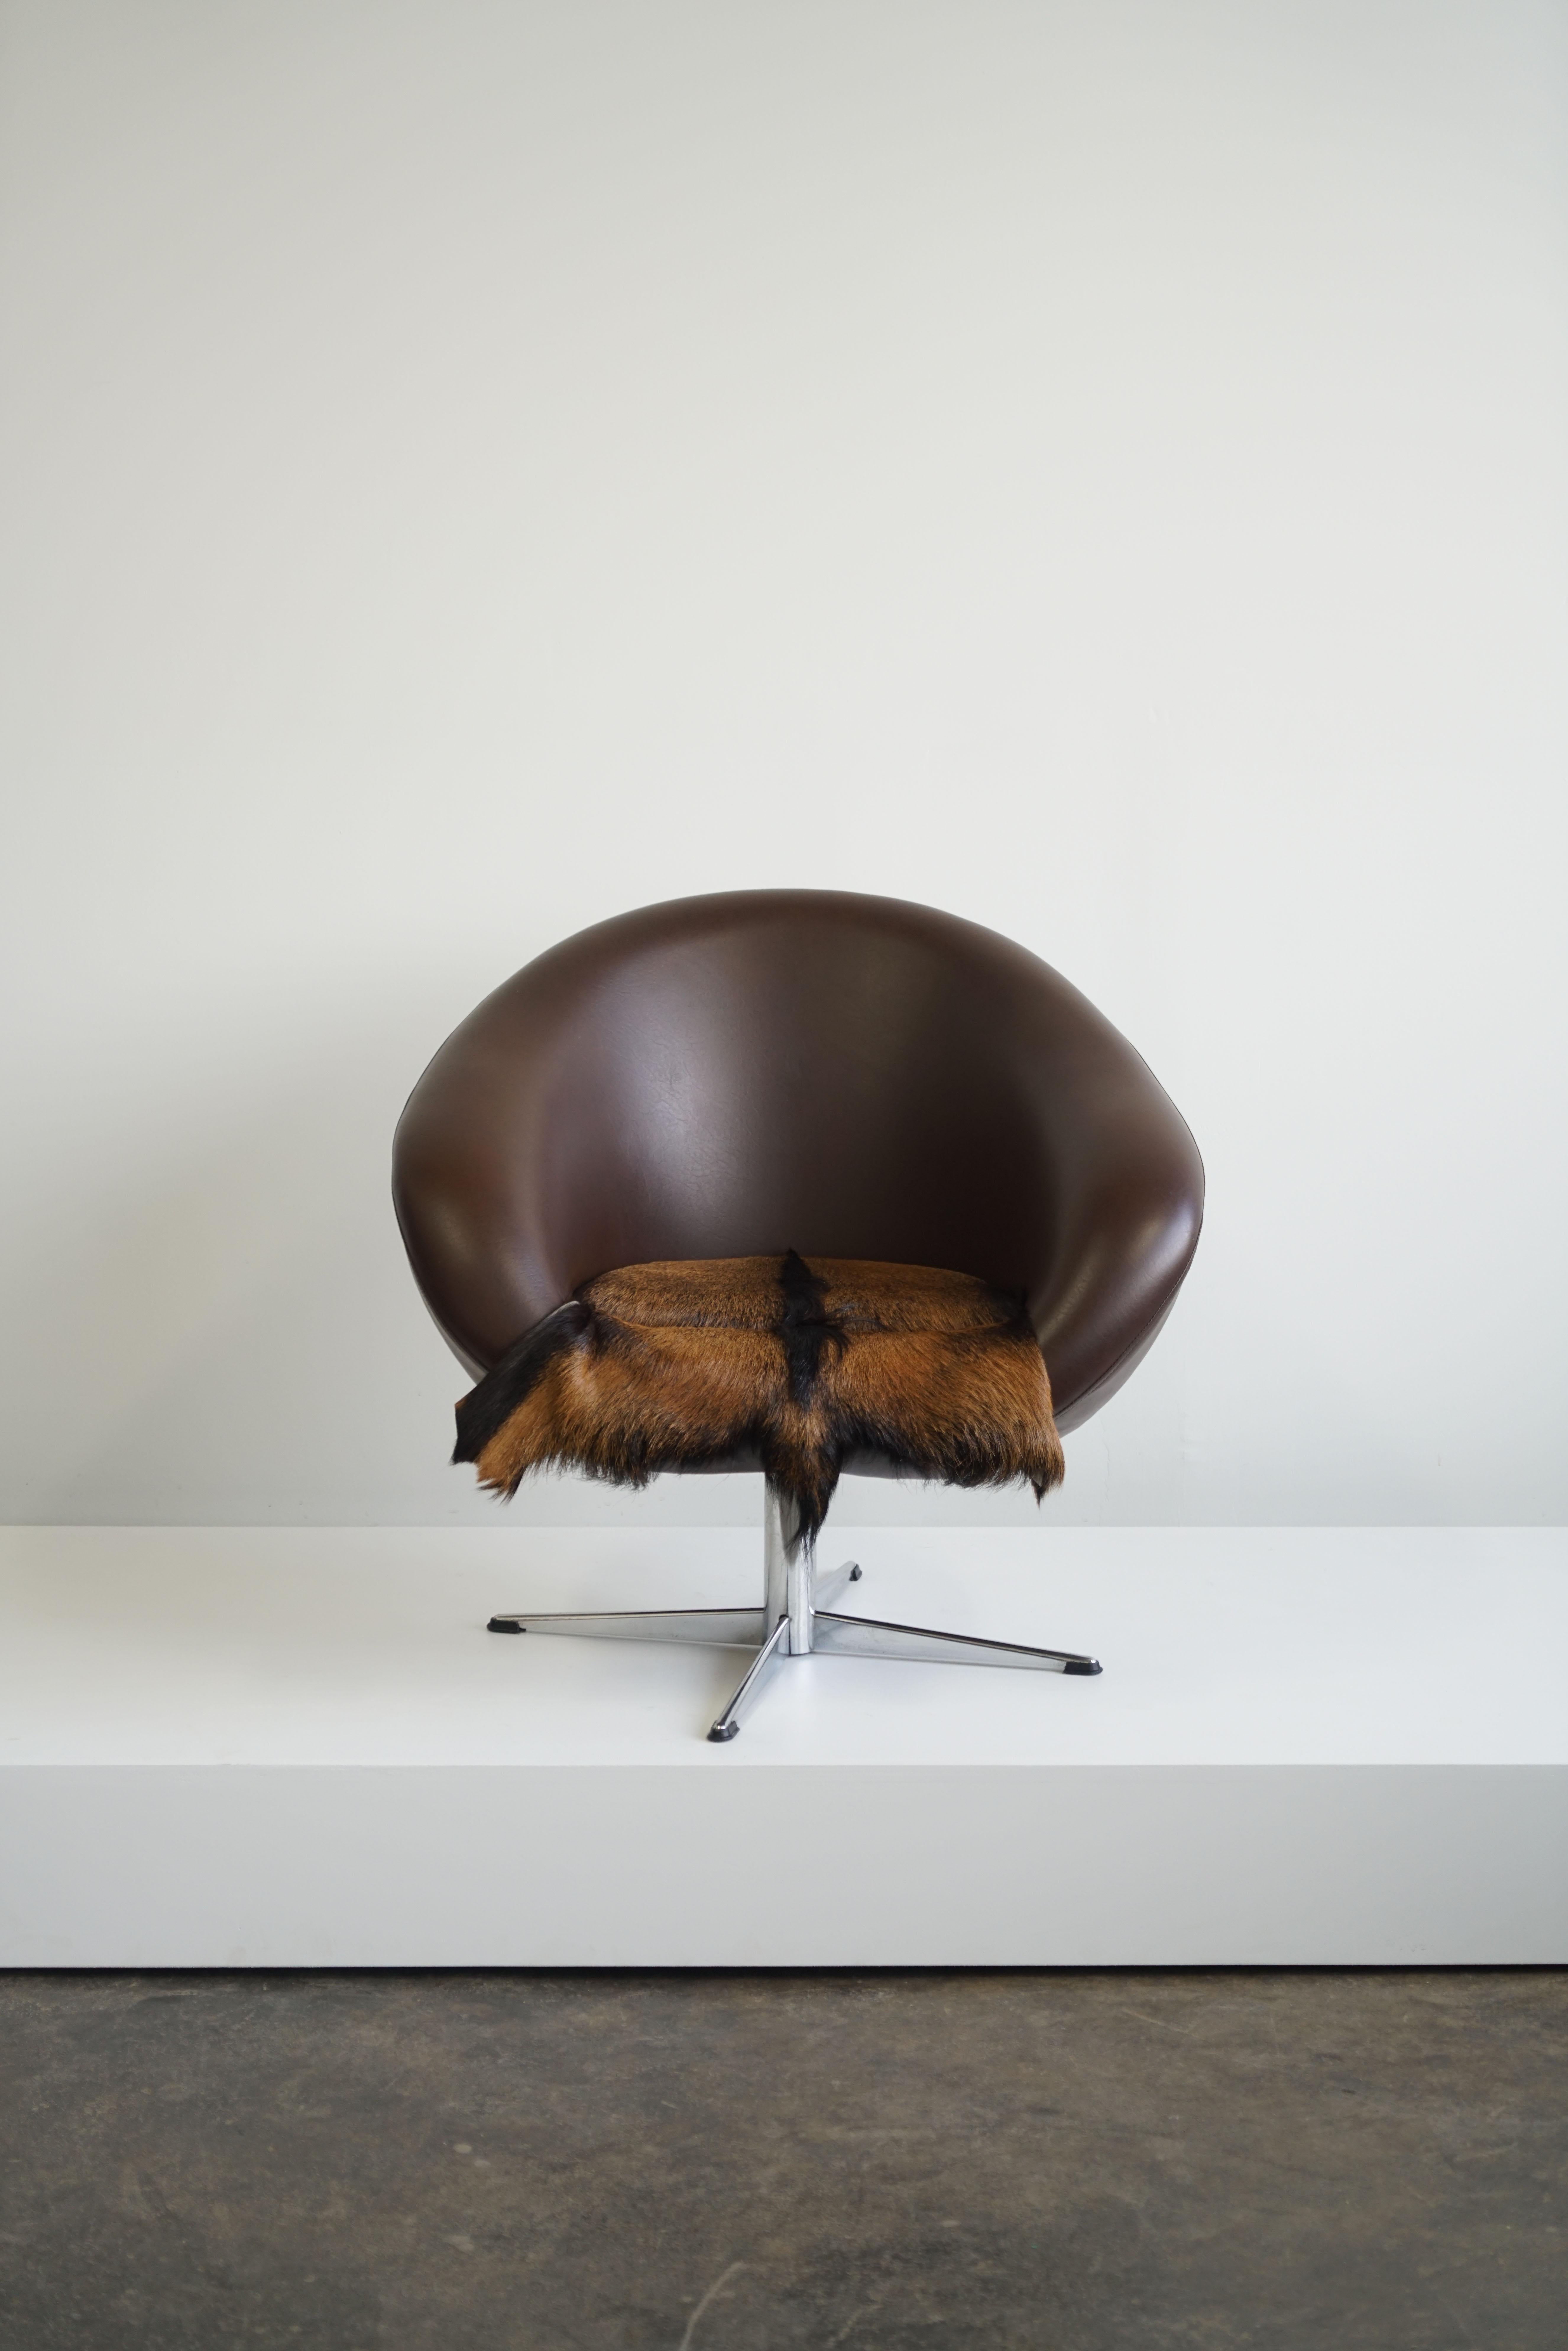 A dutch mid-century swivel tub chair in brown leather with fur pad.

Fur pad is fixed to seat. 

Slightly smaller black chair also available. 

Condition: Overall very good vintage condition. Some slight, shallow scratches on the backside as